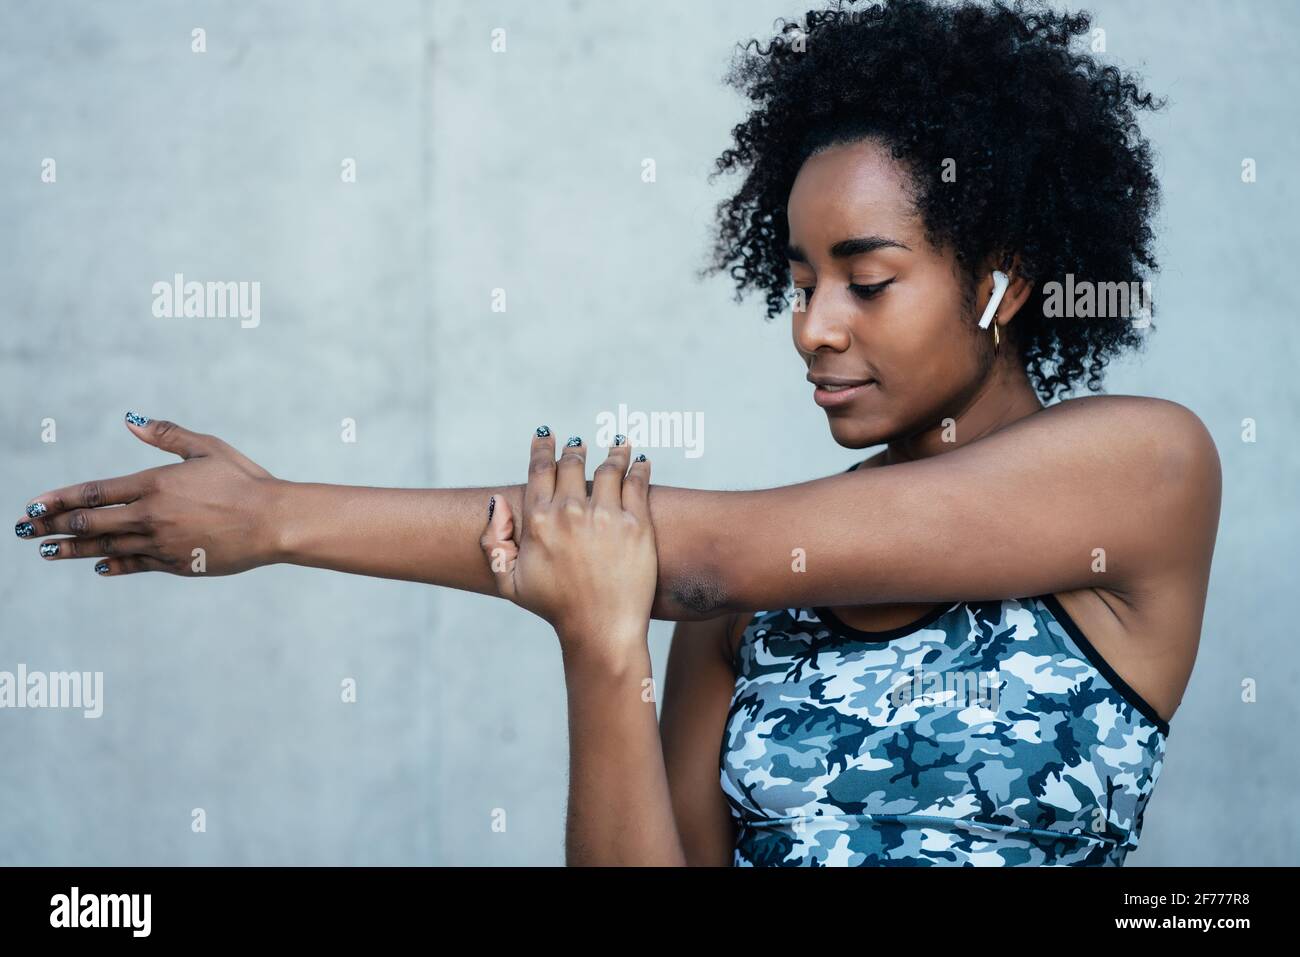 Afro athletic woman stretching arms before exercise. Stock Photo